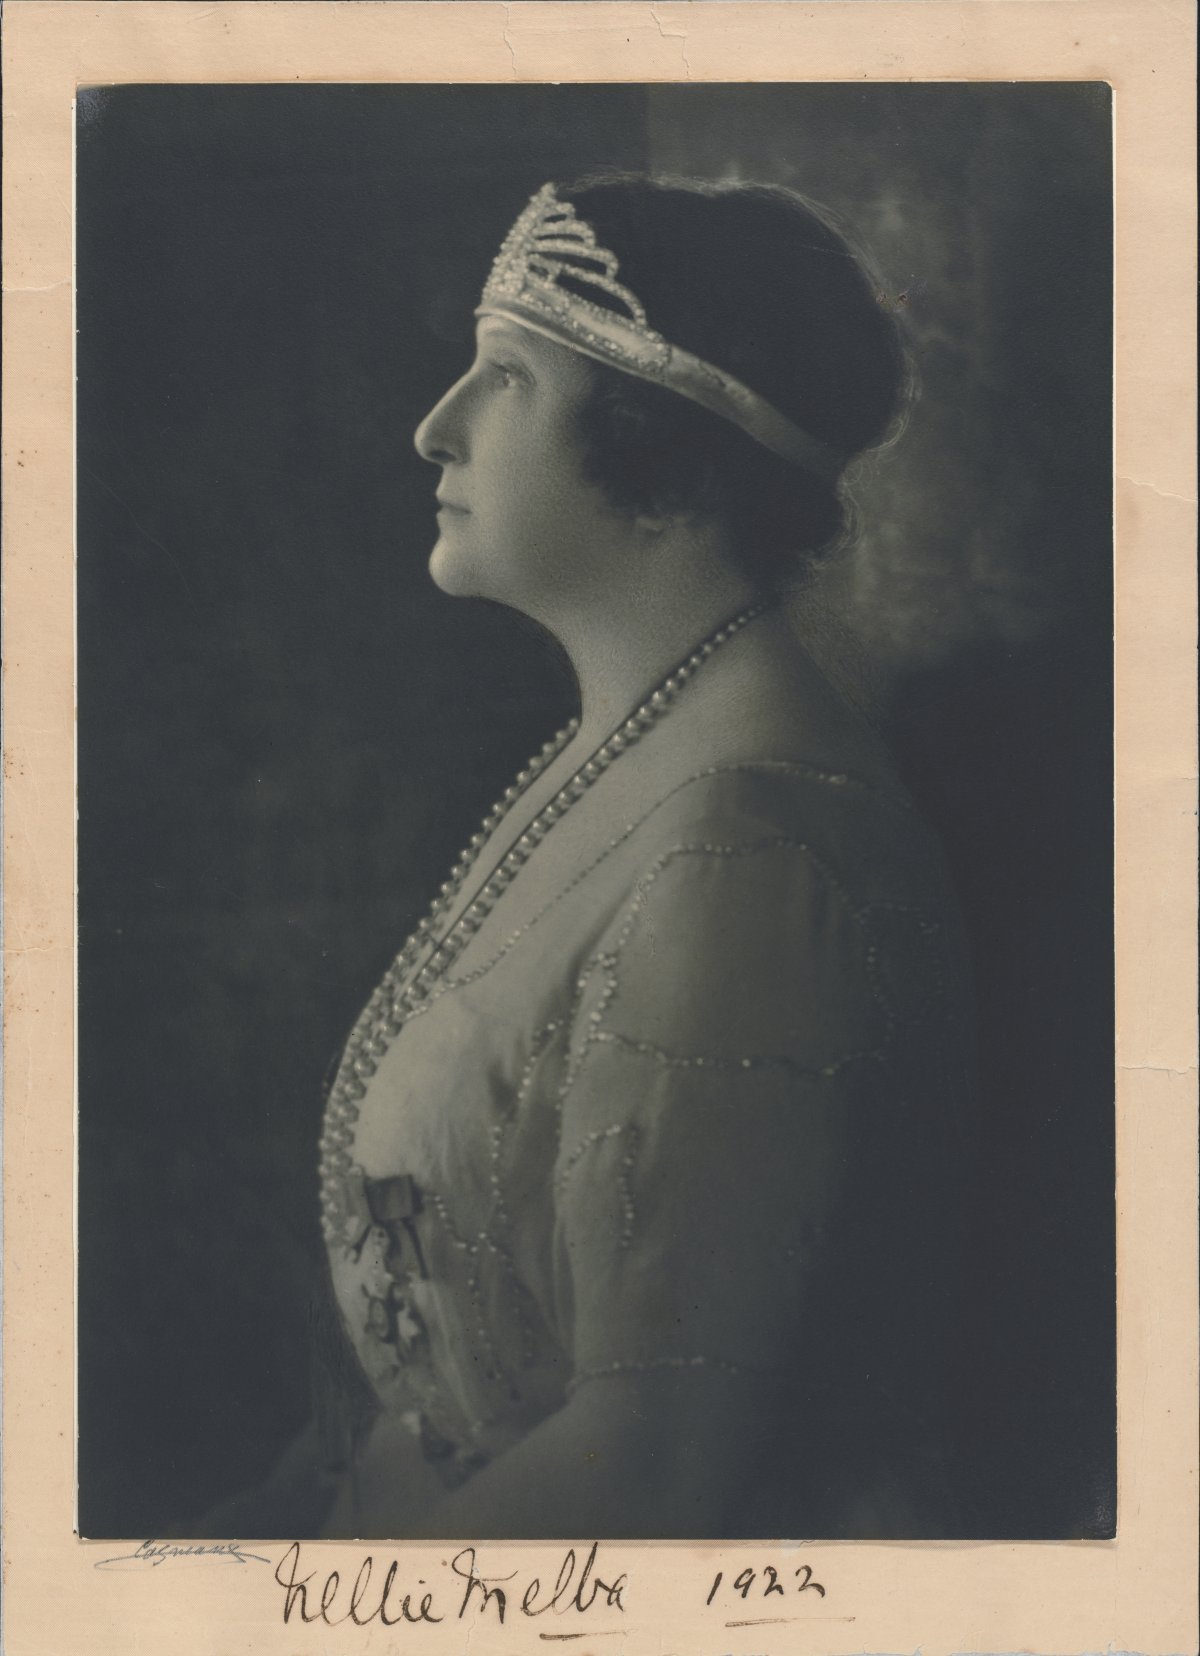 A formal portrait photograph of a lady wearing a diamond tiara. She is in profile. She has short hair and a lace gown on. She is wearing a long string of pearls. The photograph is signed "Nellie Melba 1922"